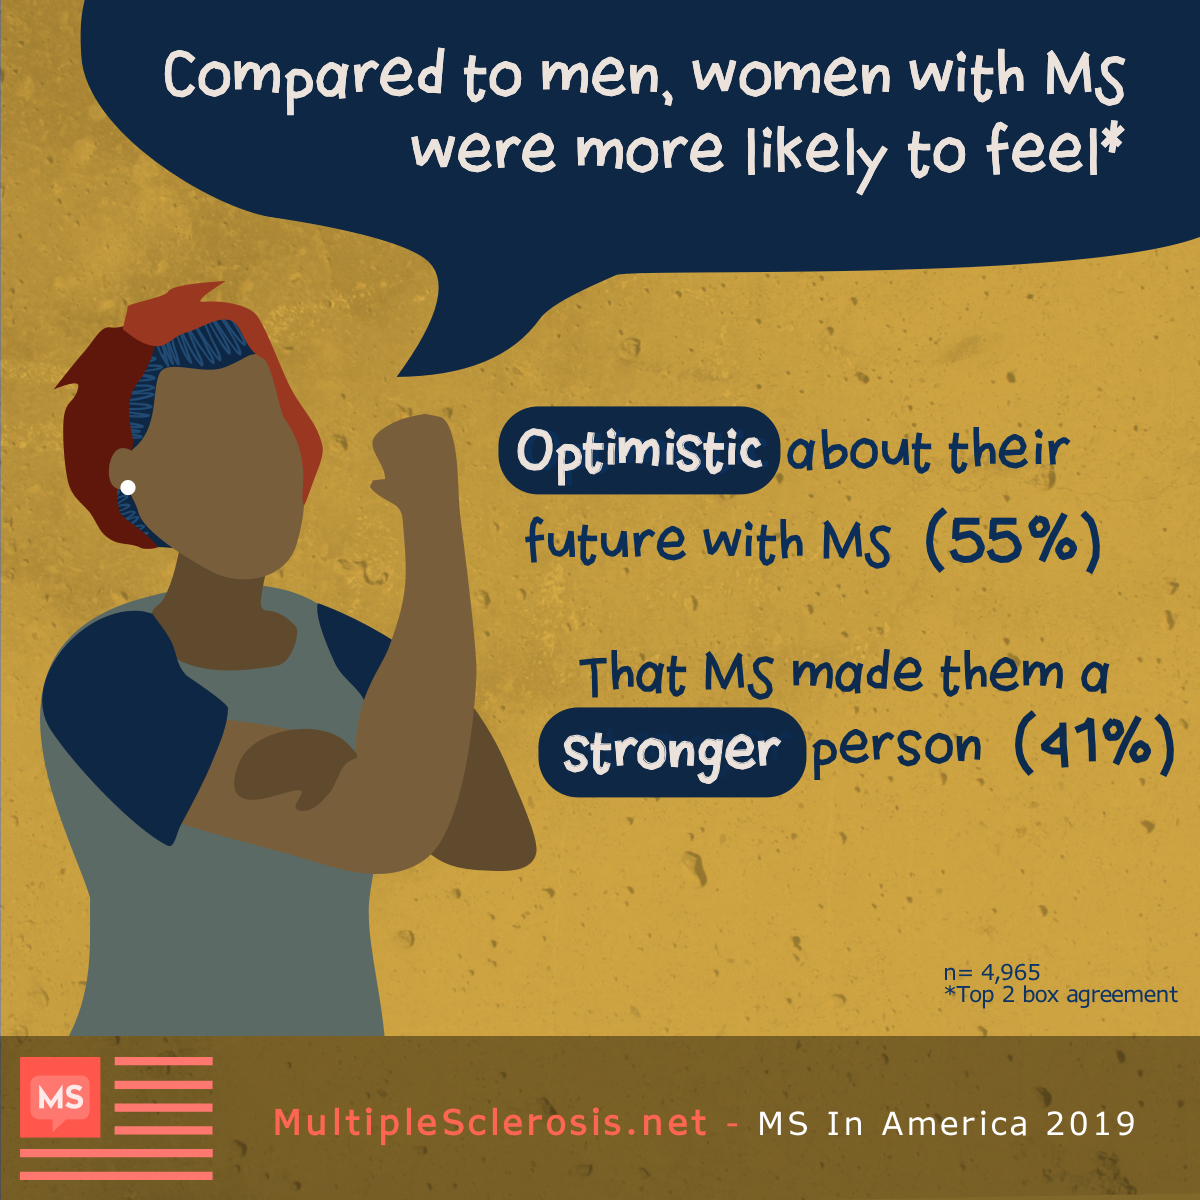 Women with MS were more likely to feel optimistic about their futures (55%) and that MS made them stronger (41%).